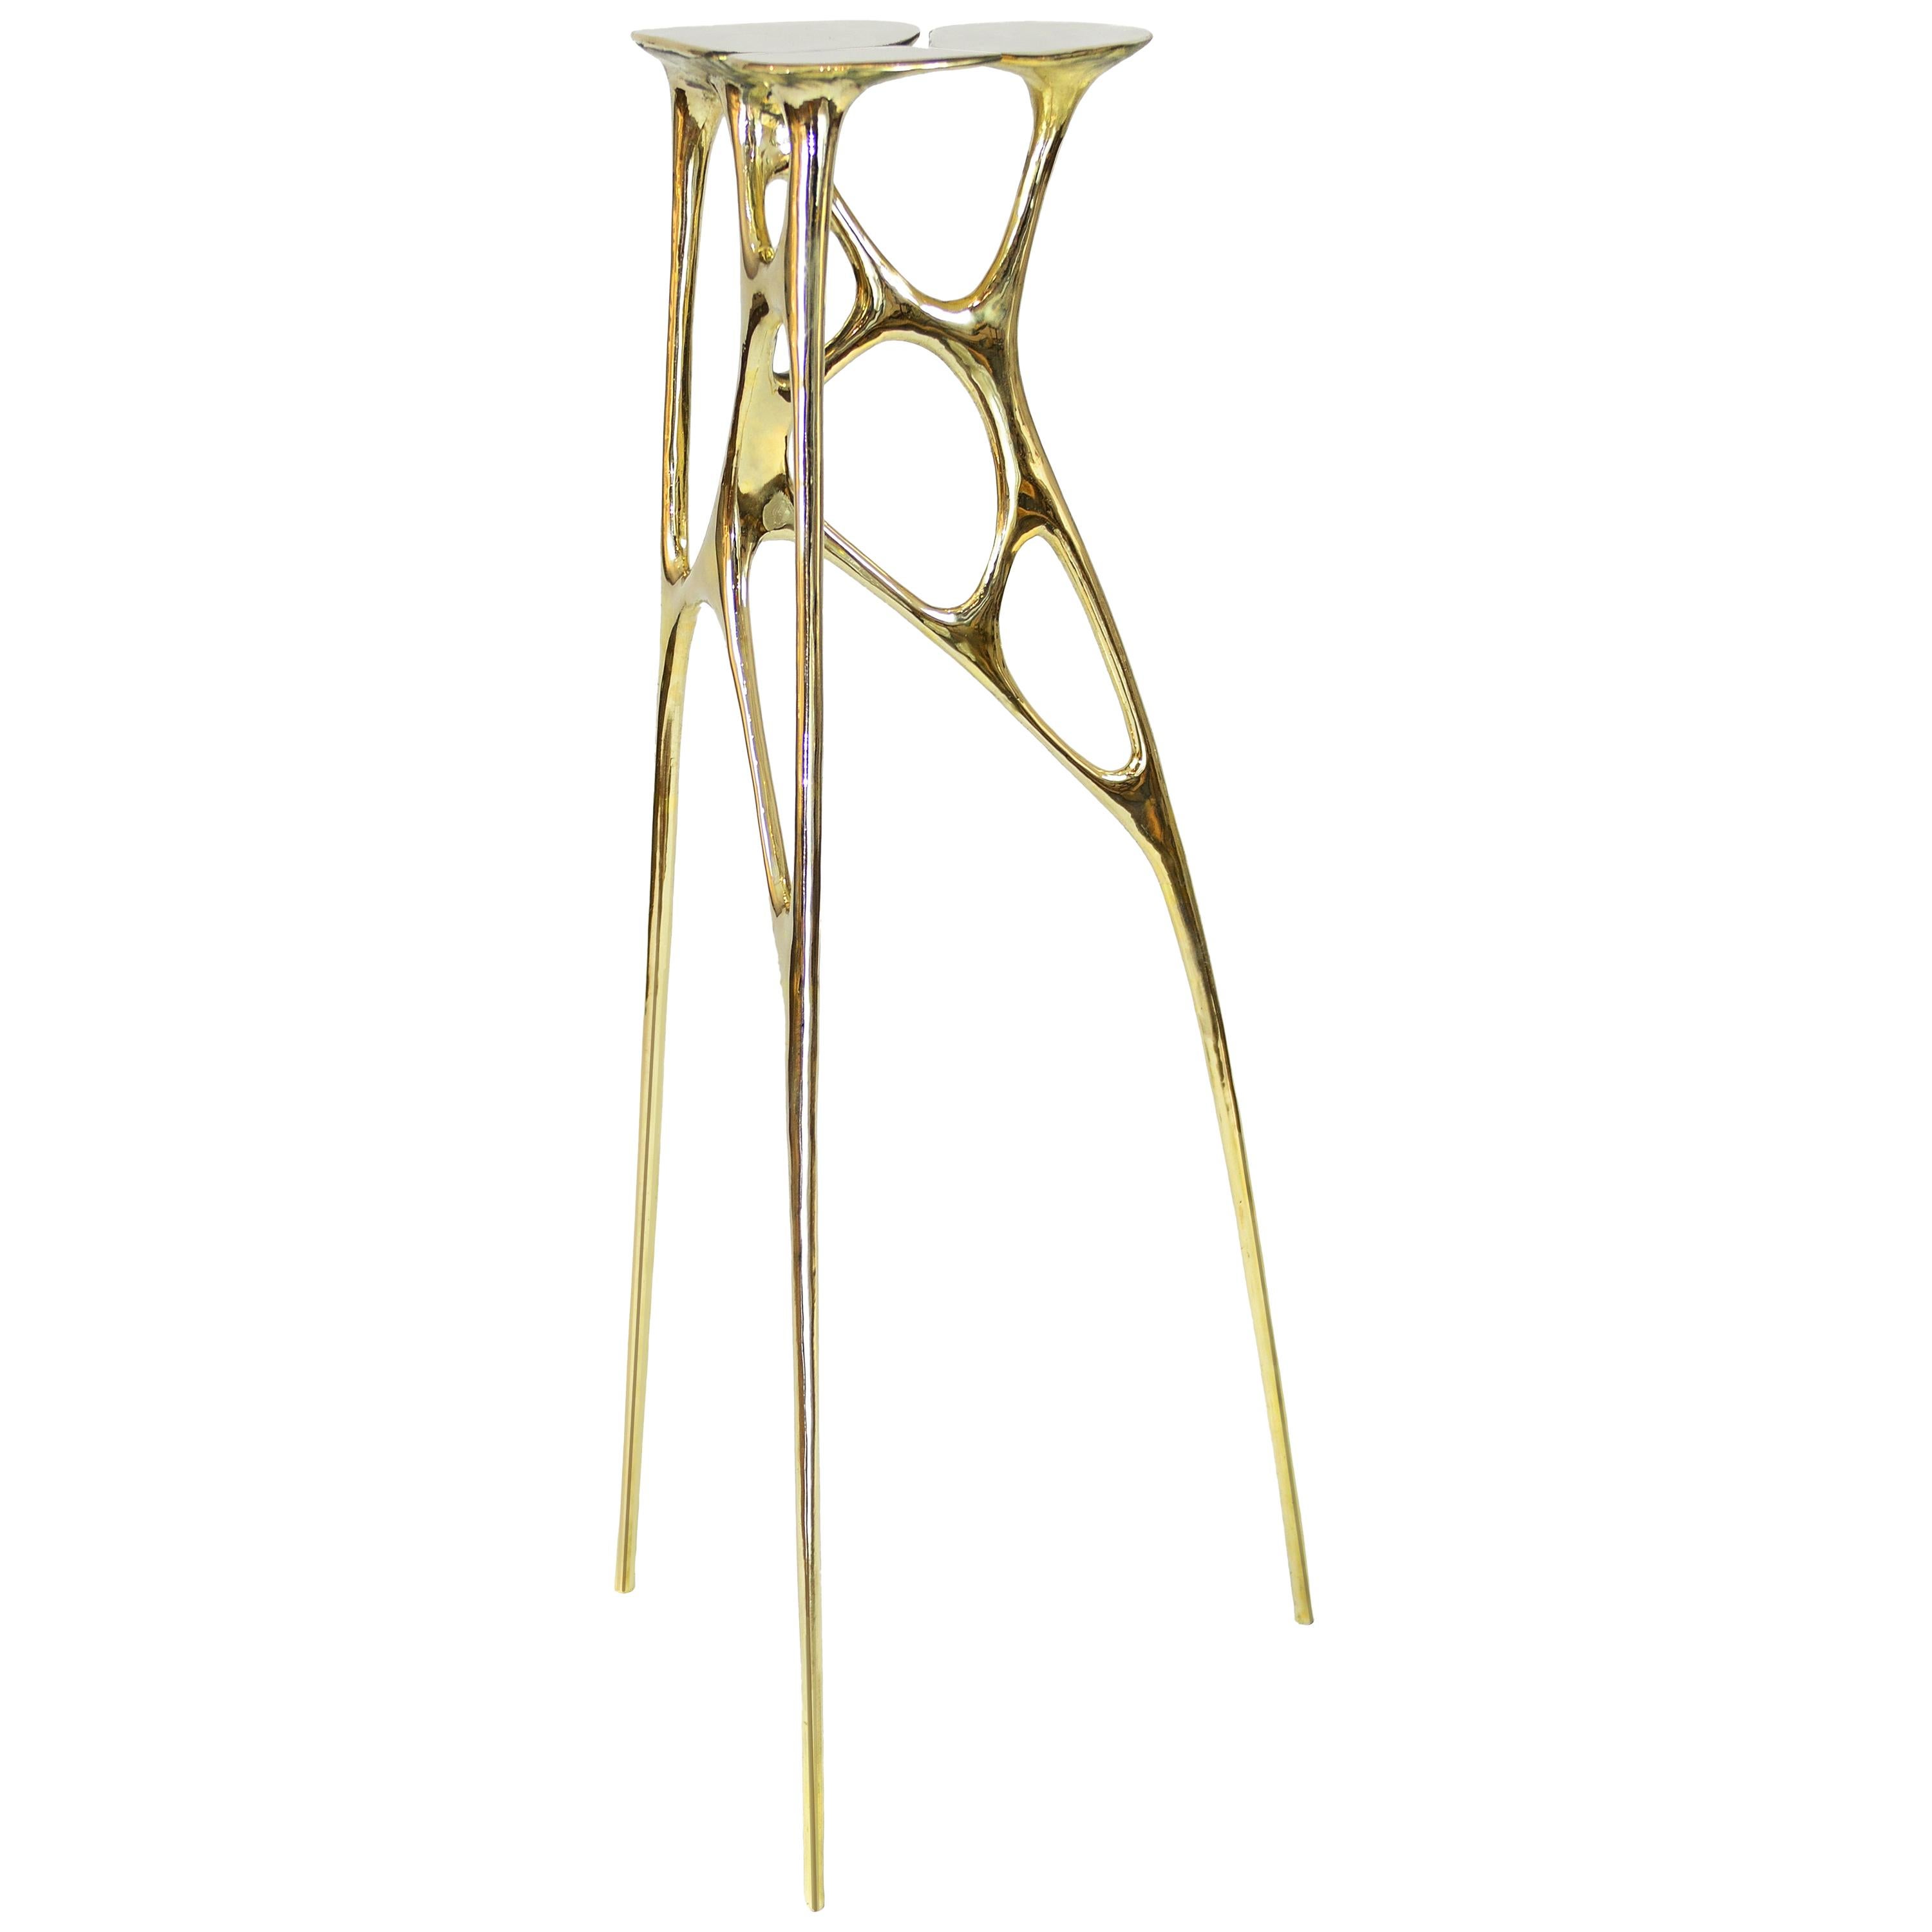 Polished Brass Gold Lotus Pedestal/Planter Stand/Accent Table by Zhipeng Tan For Sale